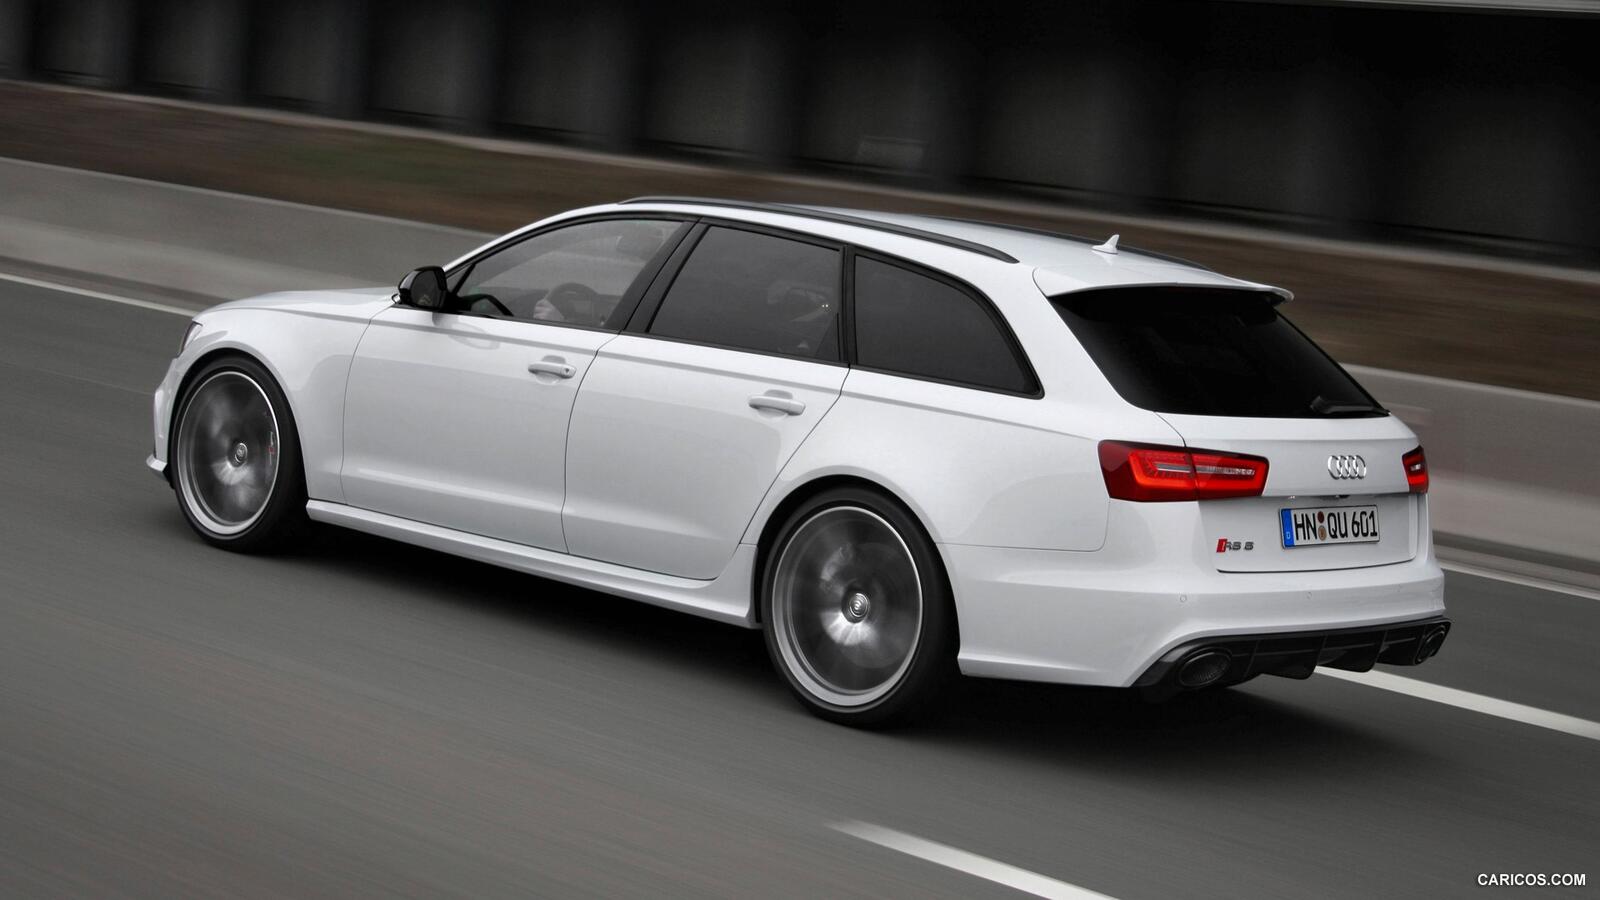 Free photo Audi rs 6 station wagon in white